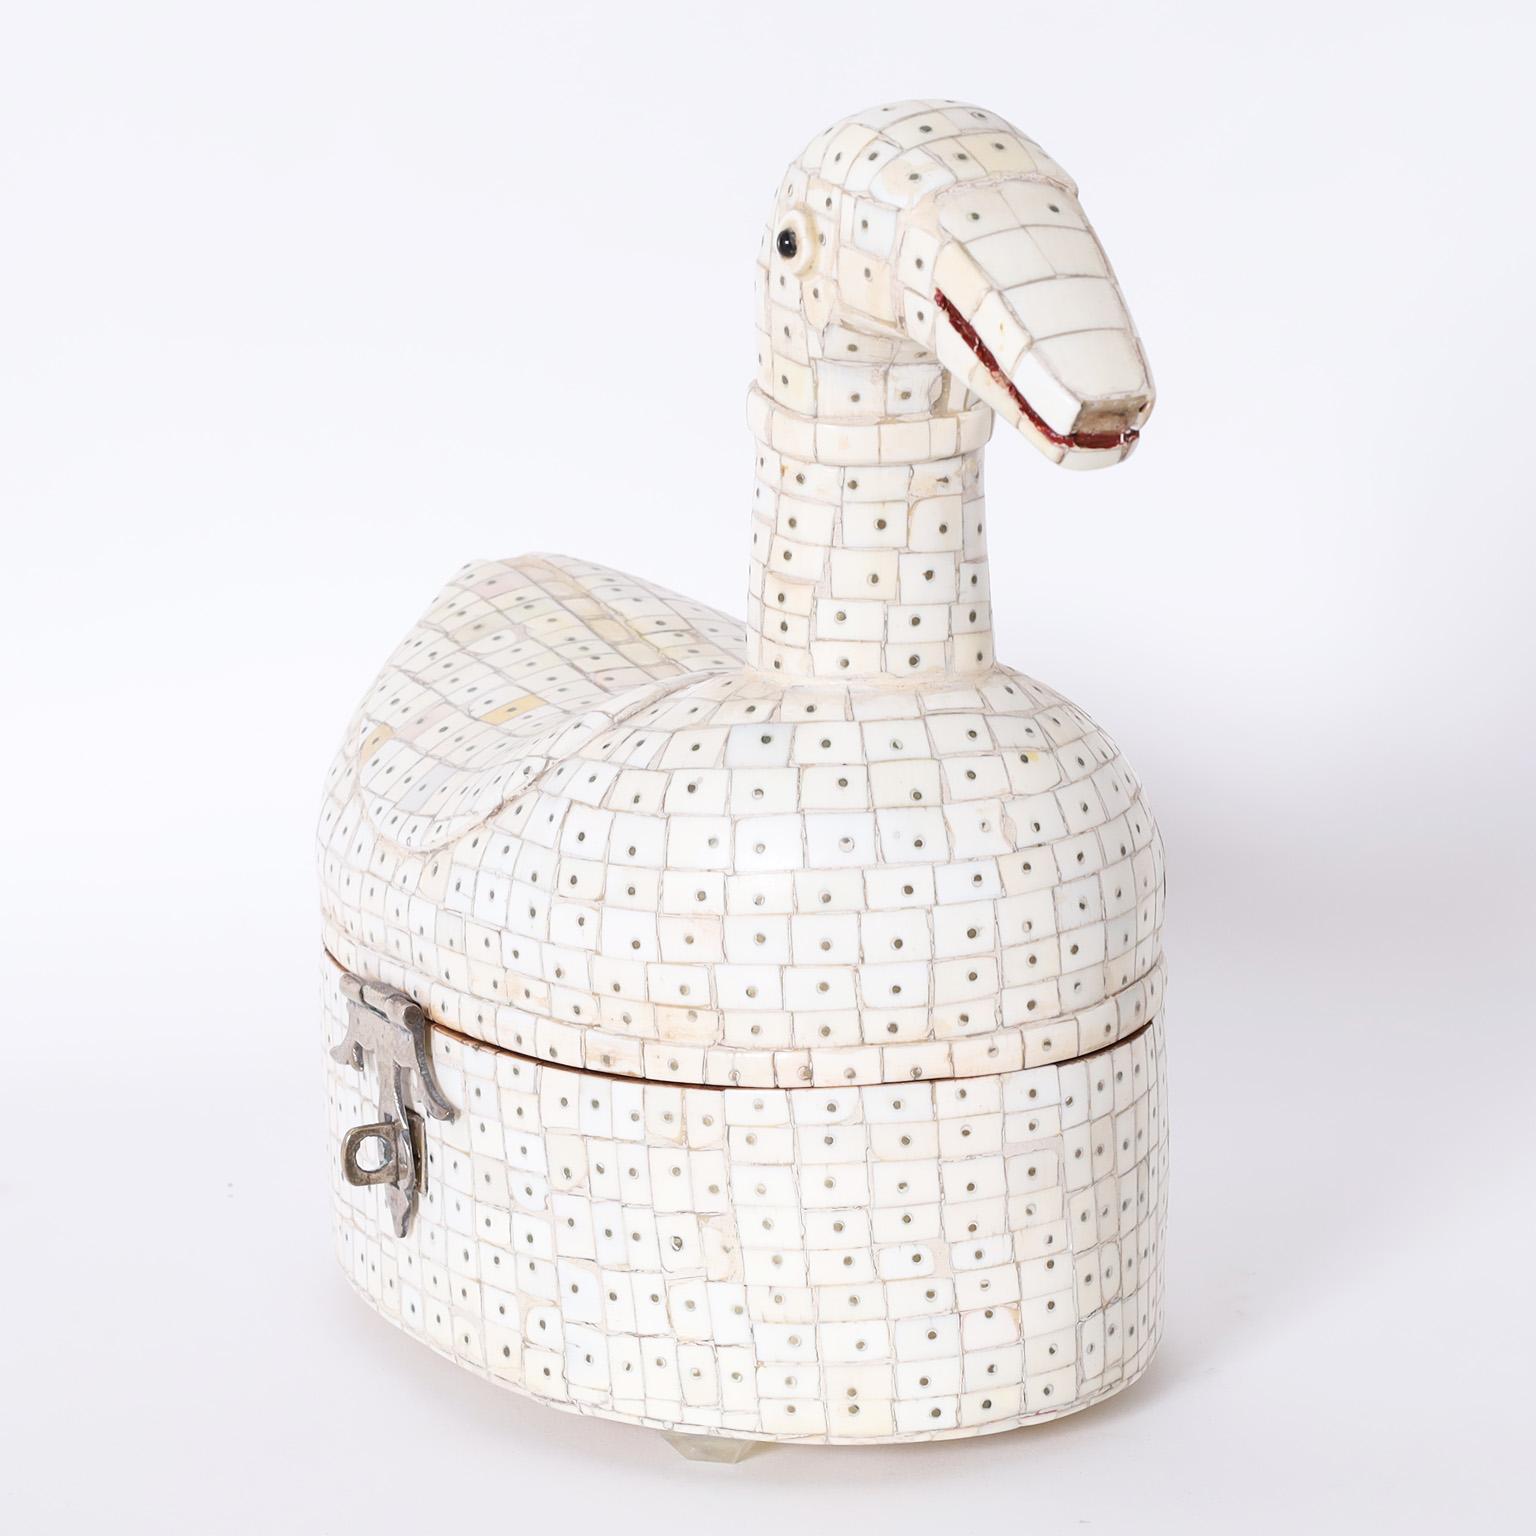 Delightful Anglo Indian lidded box crafted in a bone mosaic over a wood frame in a stylized whimsical duck form.